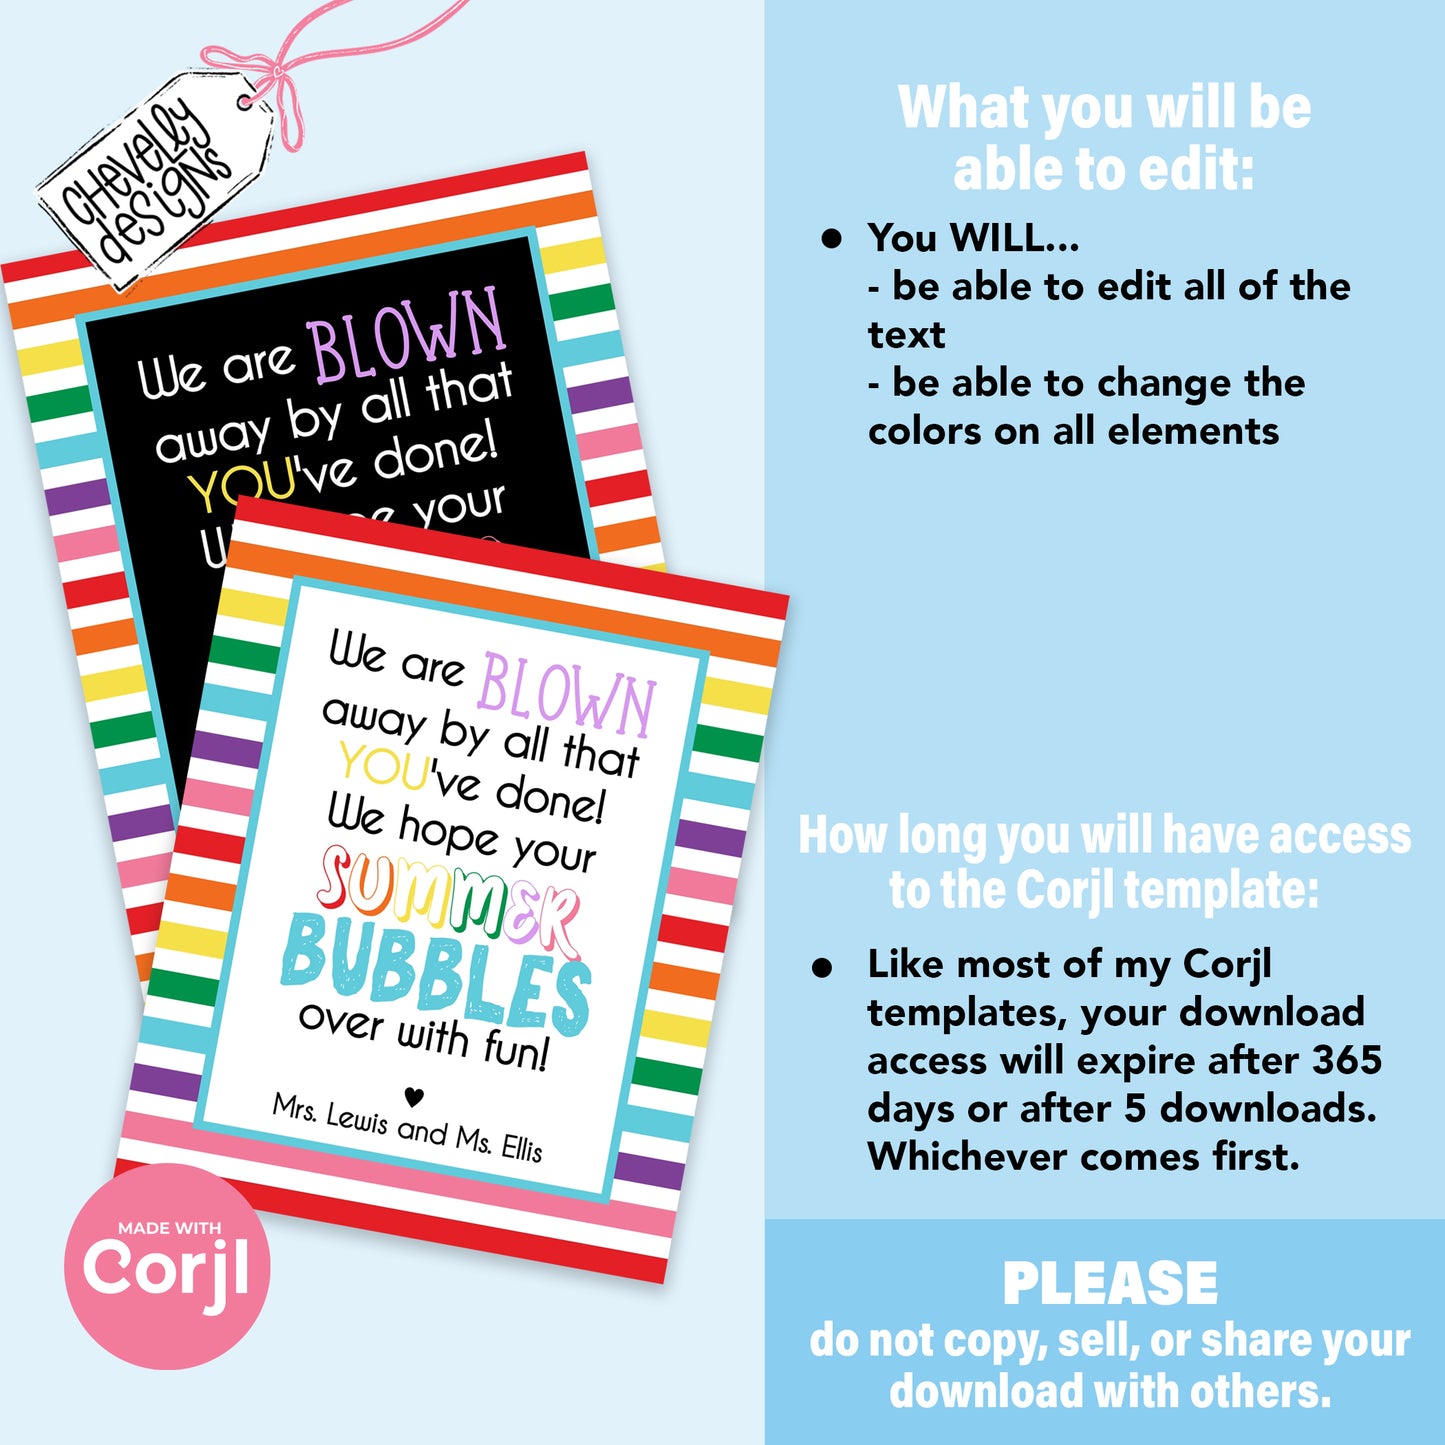 Editable - Blown Away End of School Student Gift Tags for Bubbles - Printable Digital File